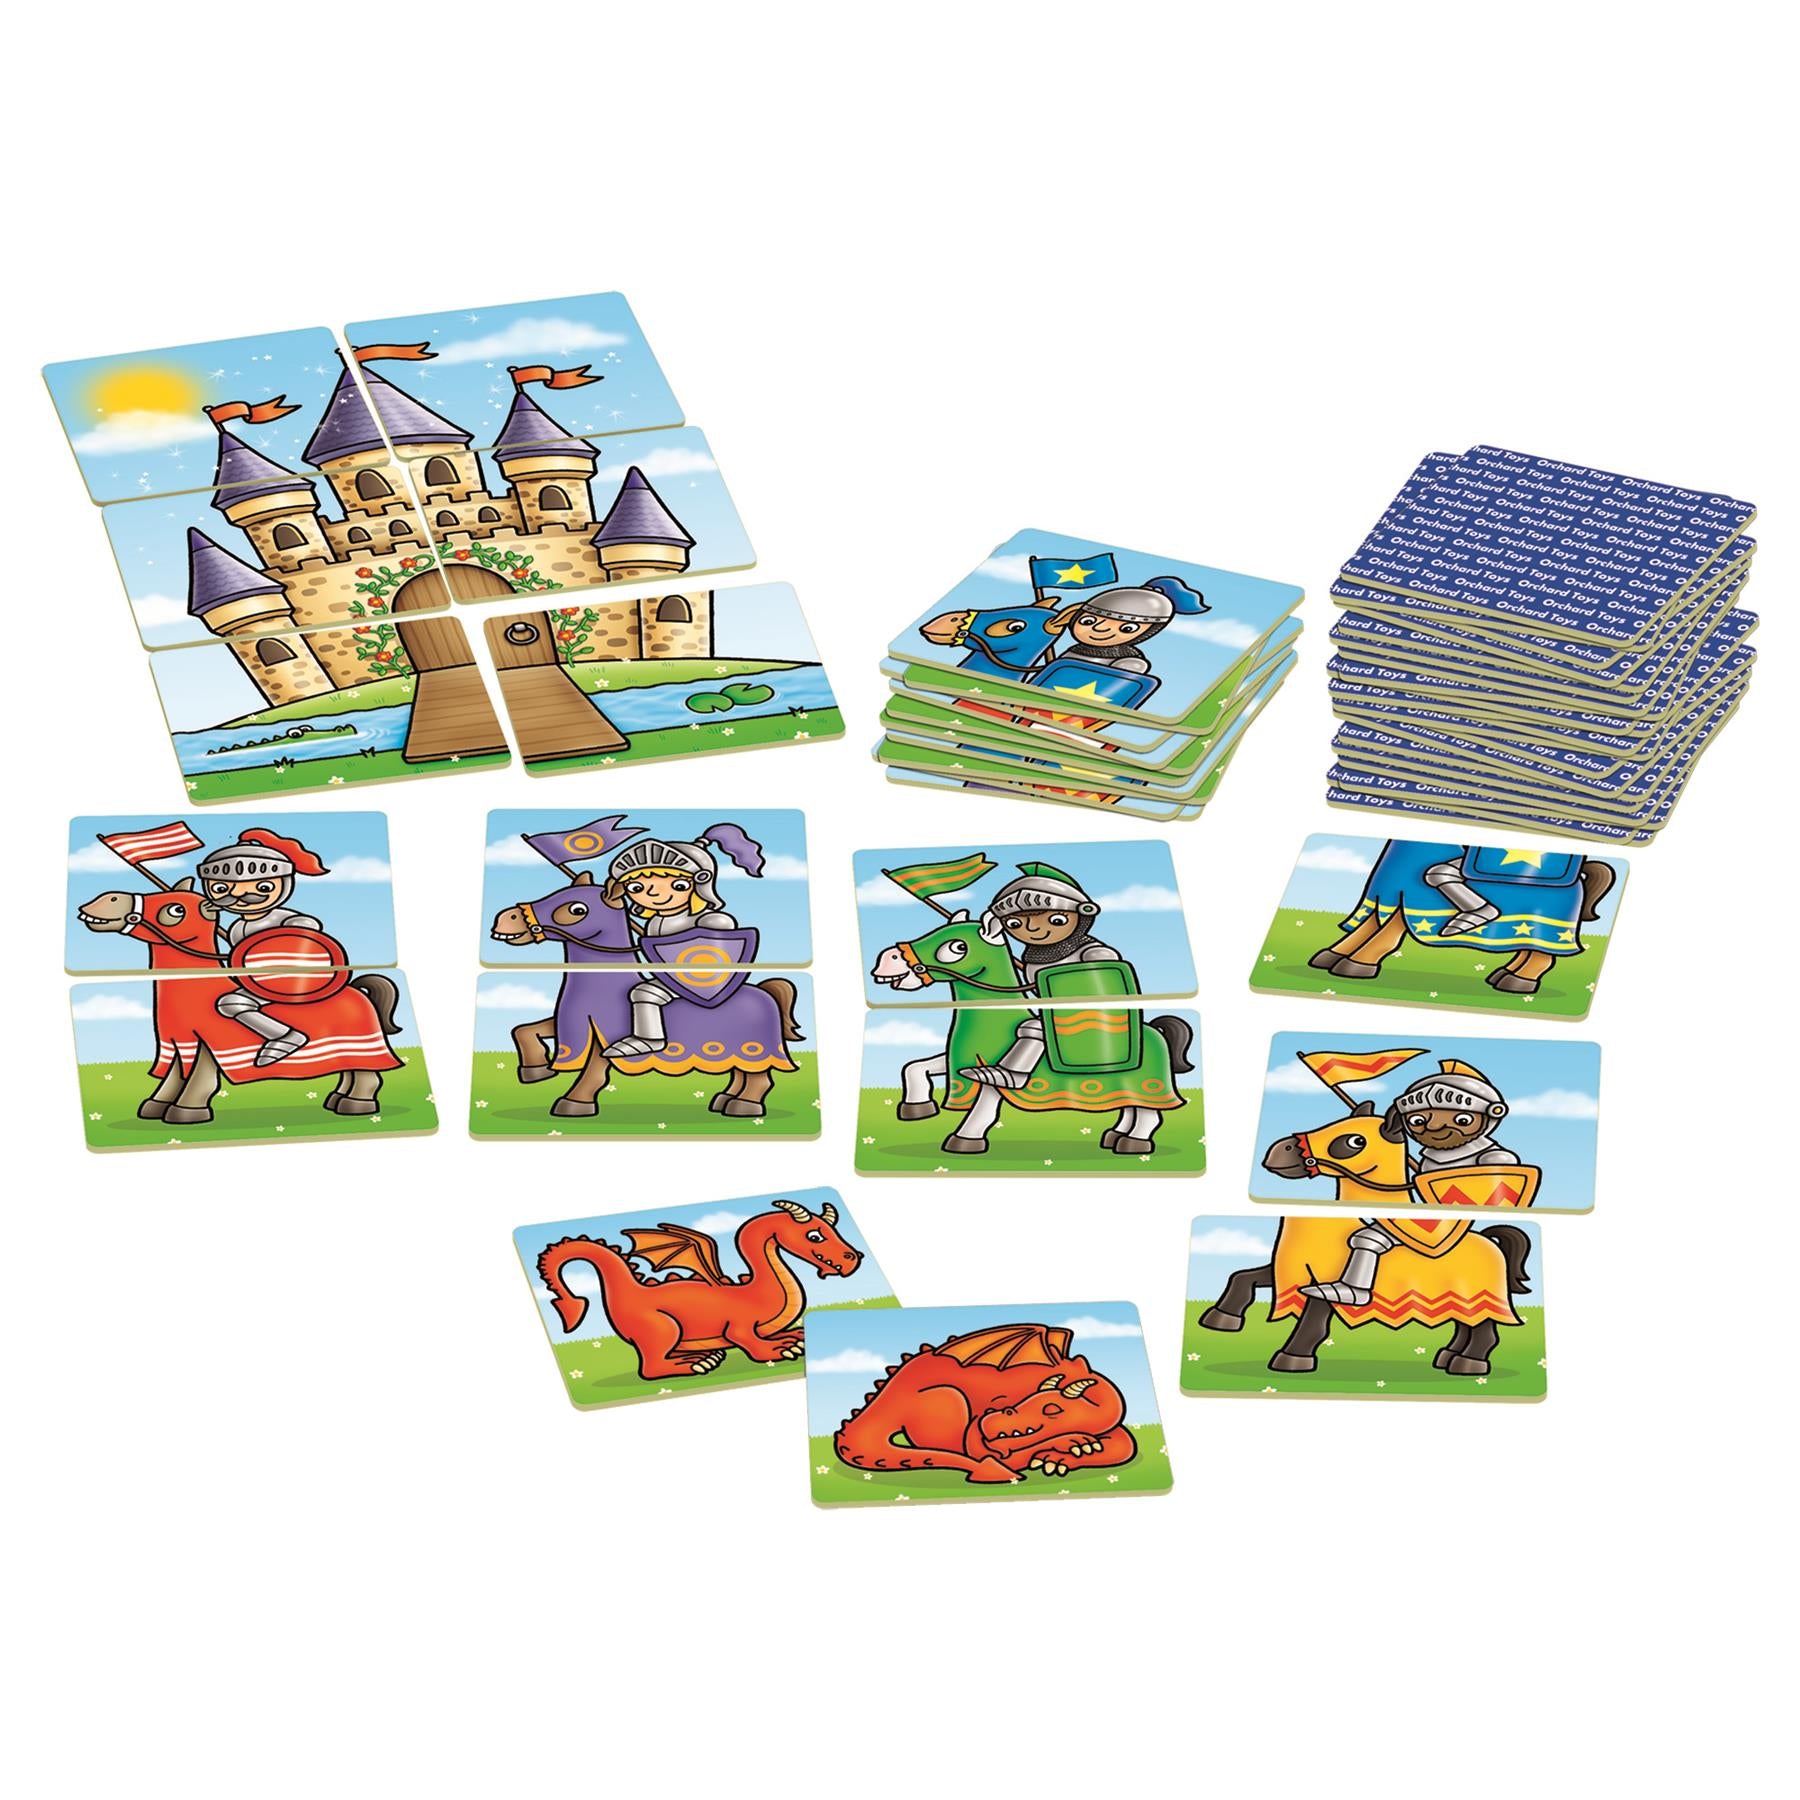 Orchard Toys Knights & Dragons Game